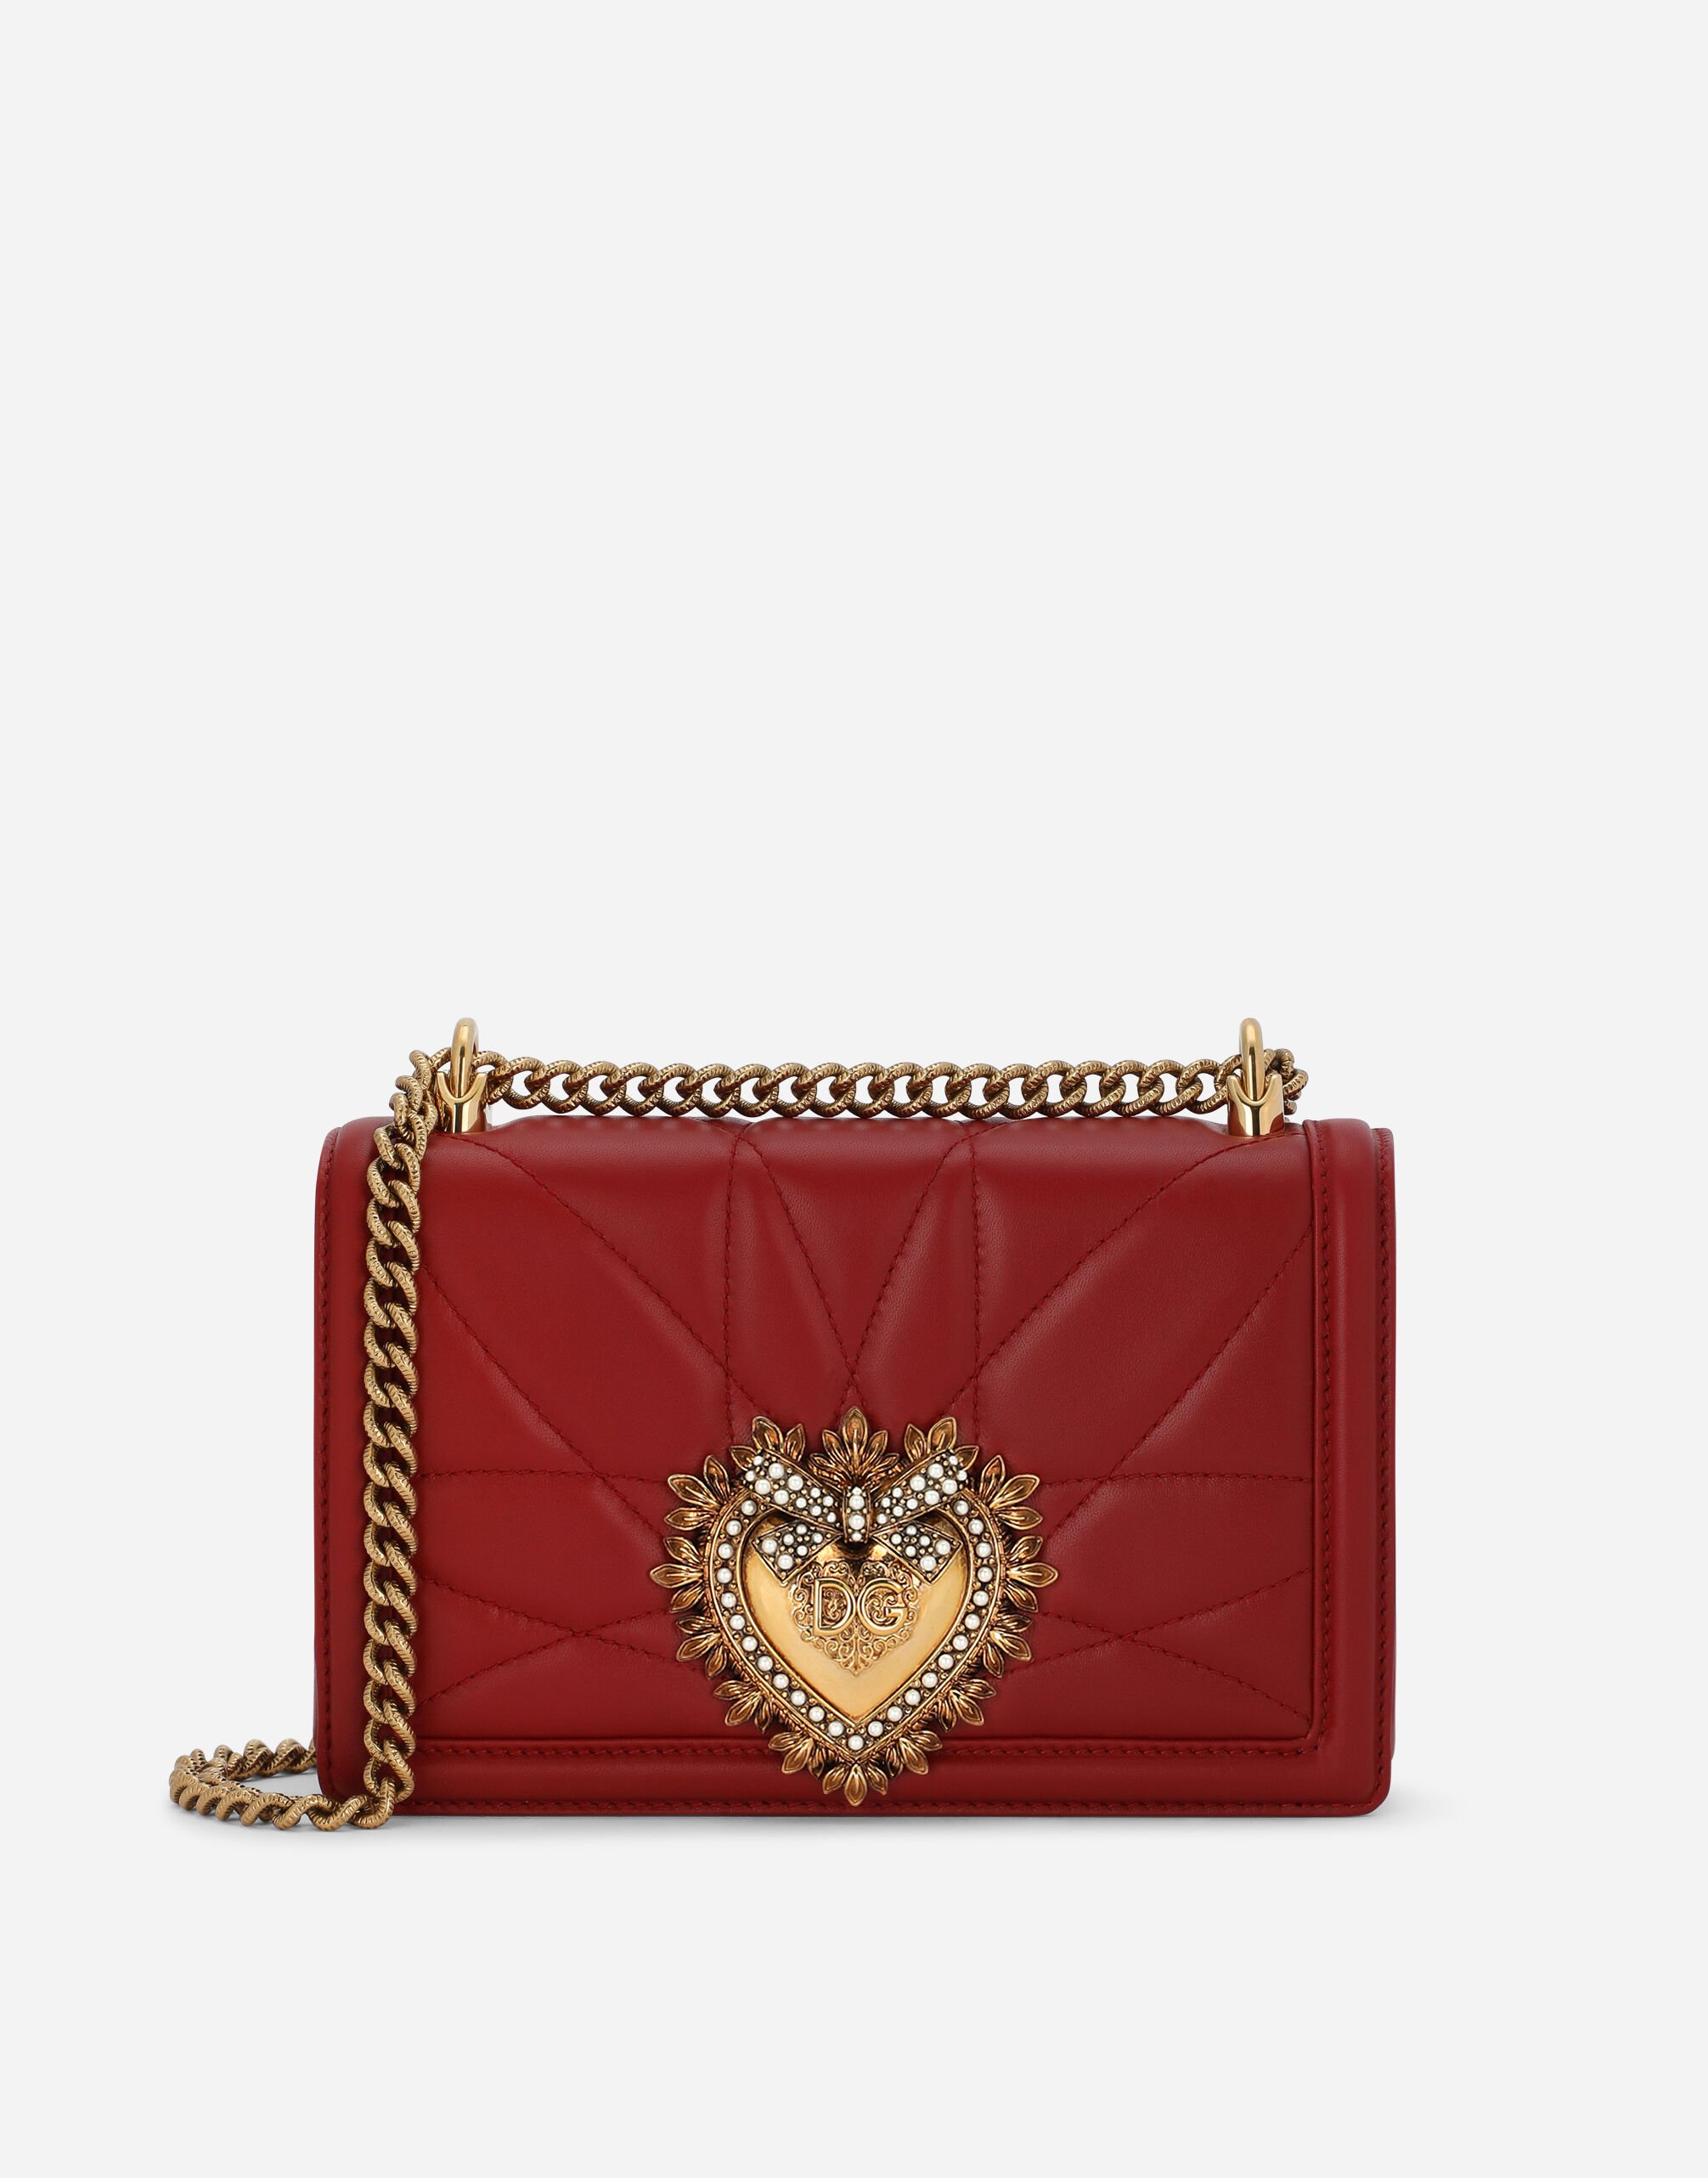 Dolce & Gabbana Medium Devotion bag in quilted nappa leather Red BB6711AV893